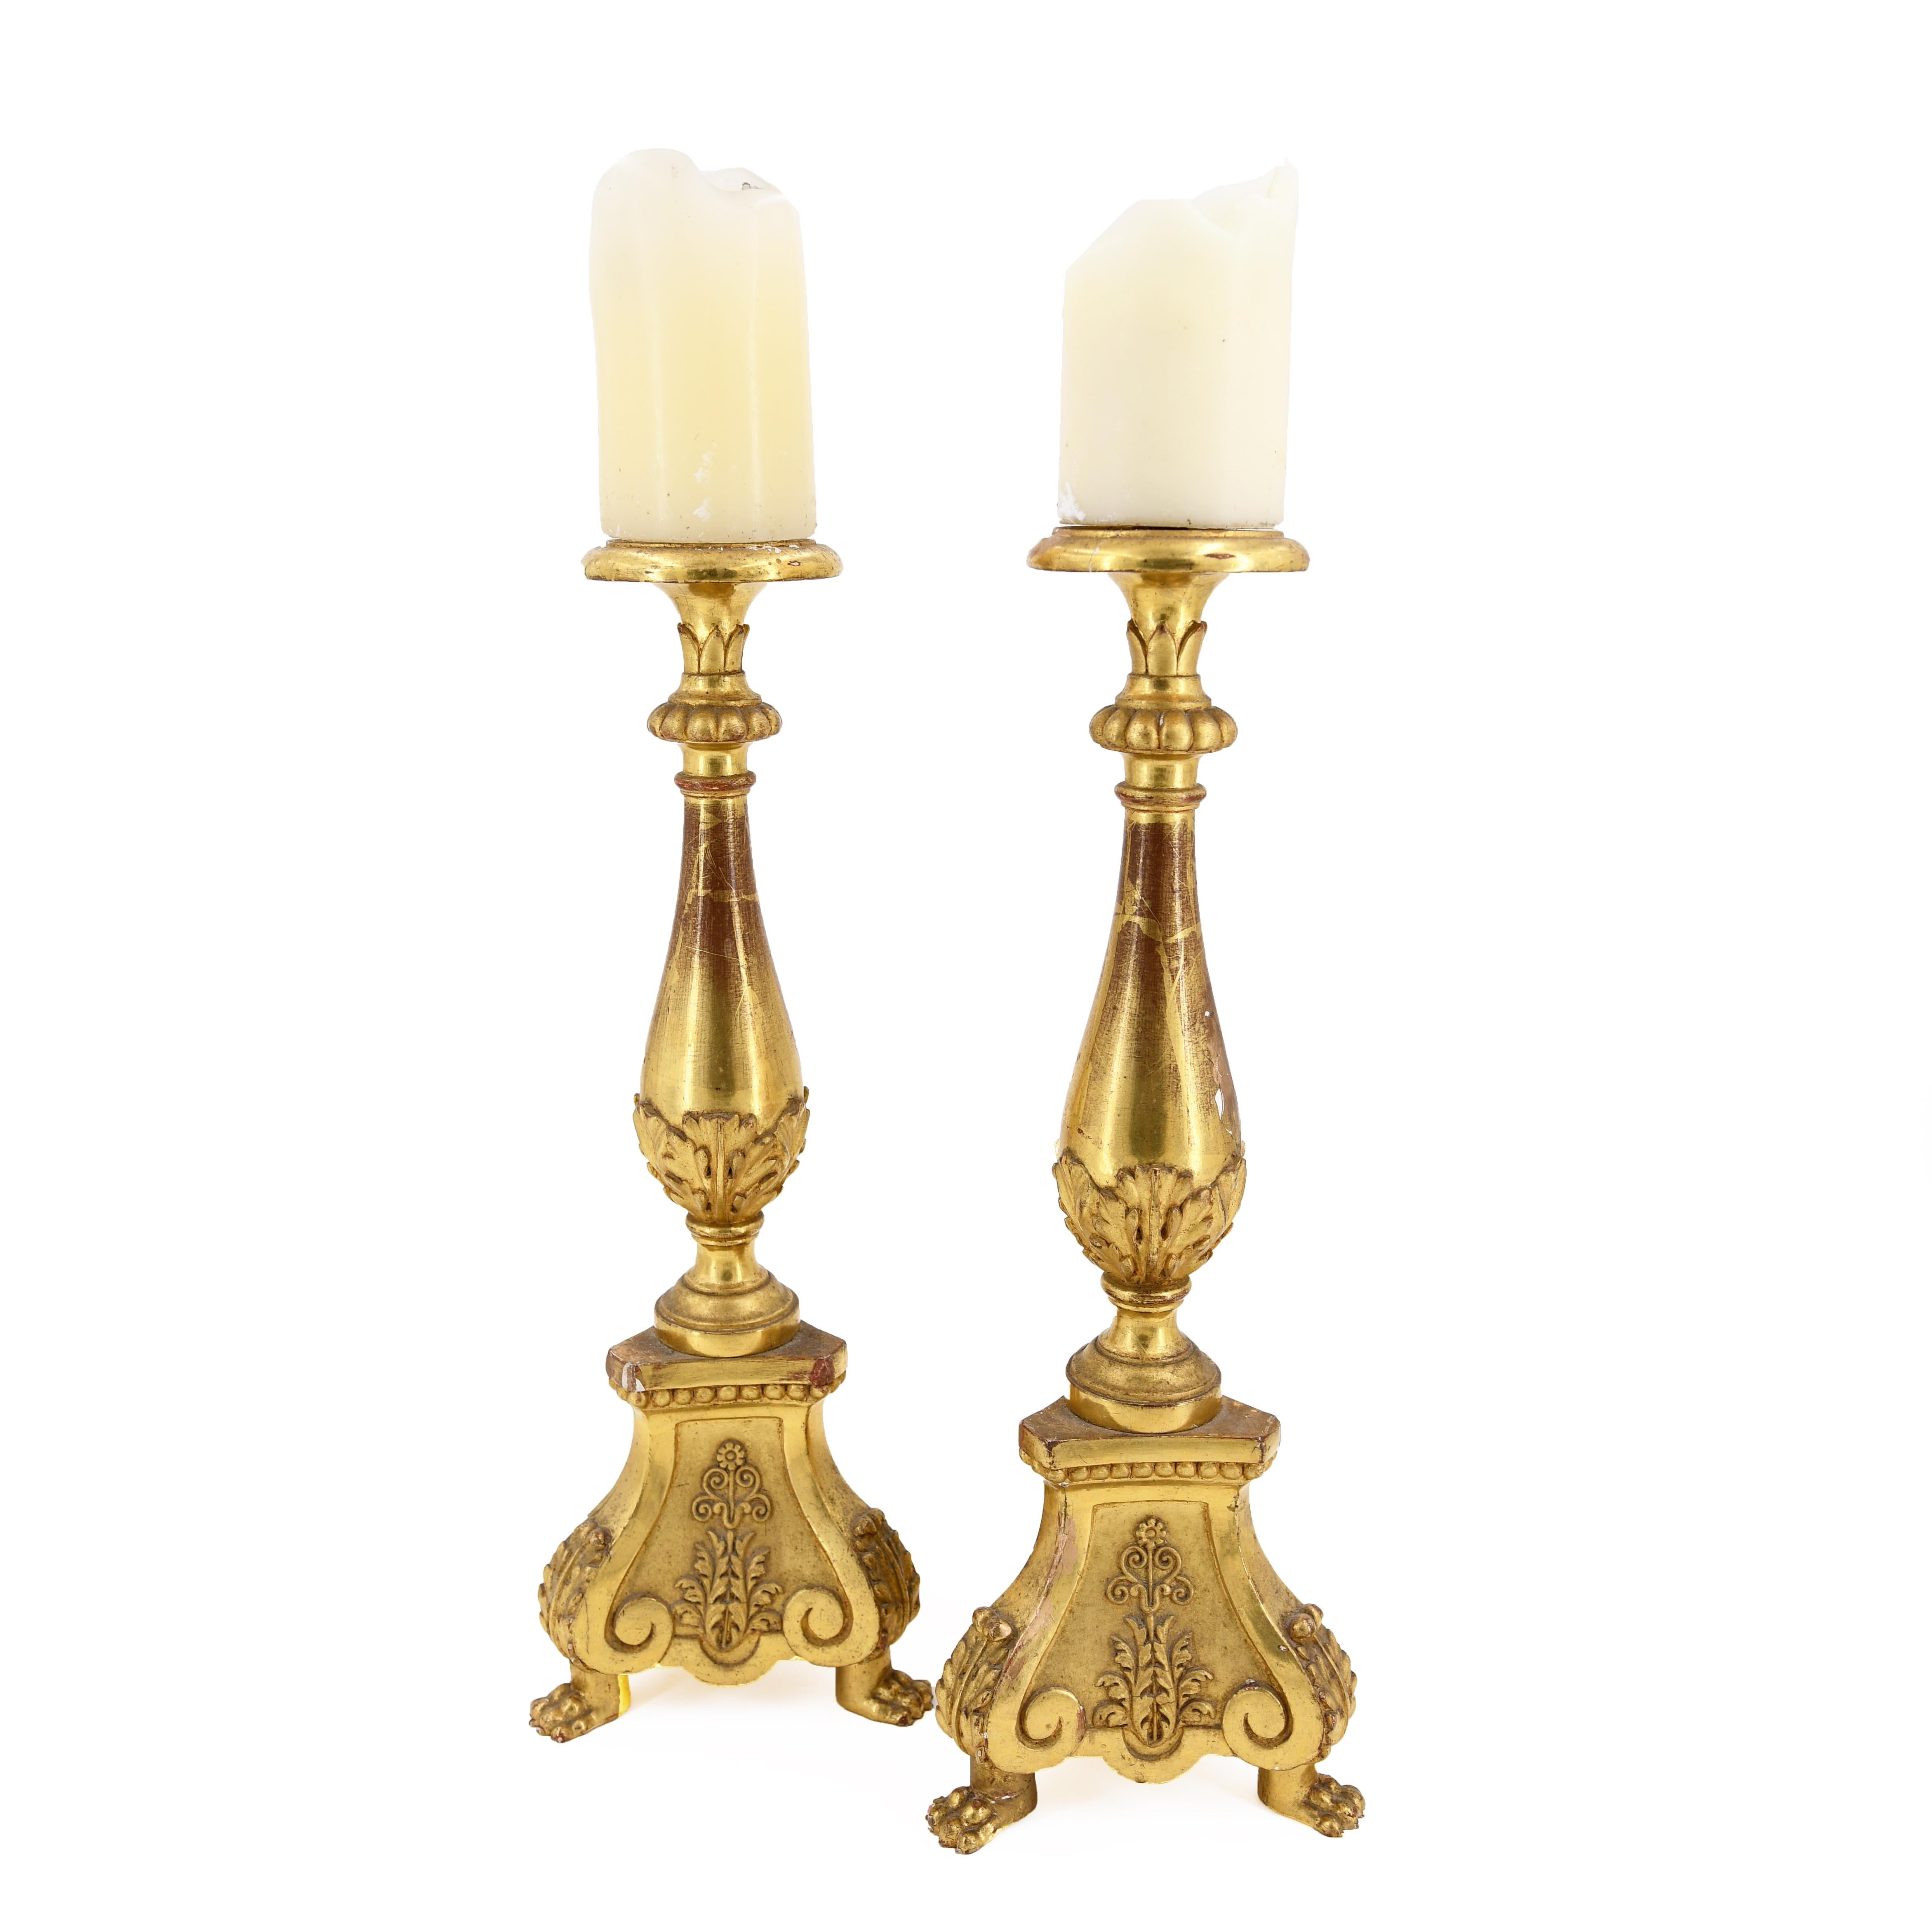 Fourth quarter 19th century, in the neoclassical taste, the baluster-form standards decorated with acanthus leaves and fitted with flaring drip pans and pricket candle holders, raised on tripartite bases decorated with panels of flowers and leaves